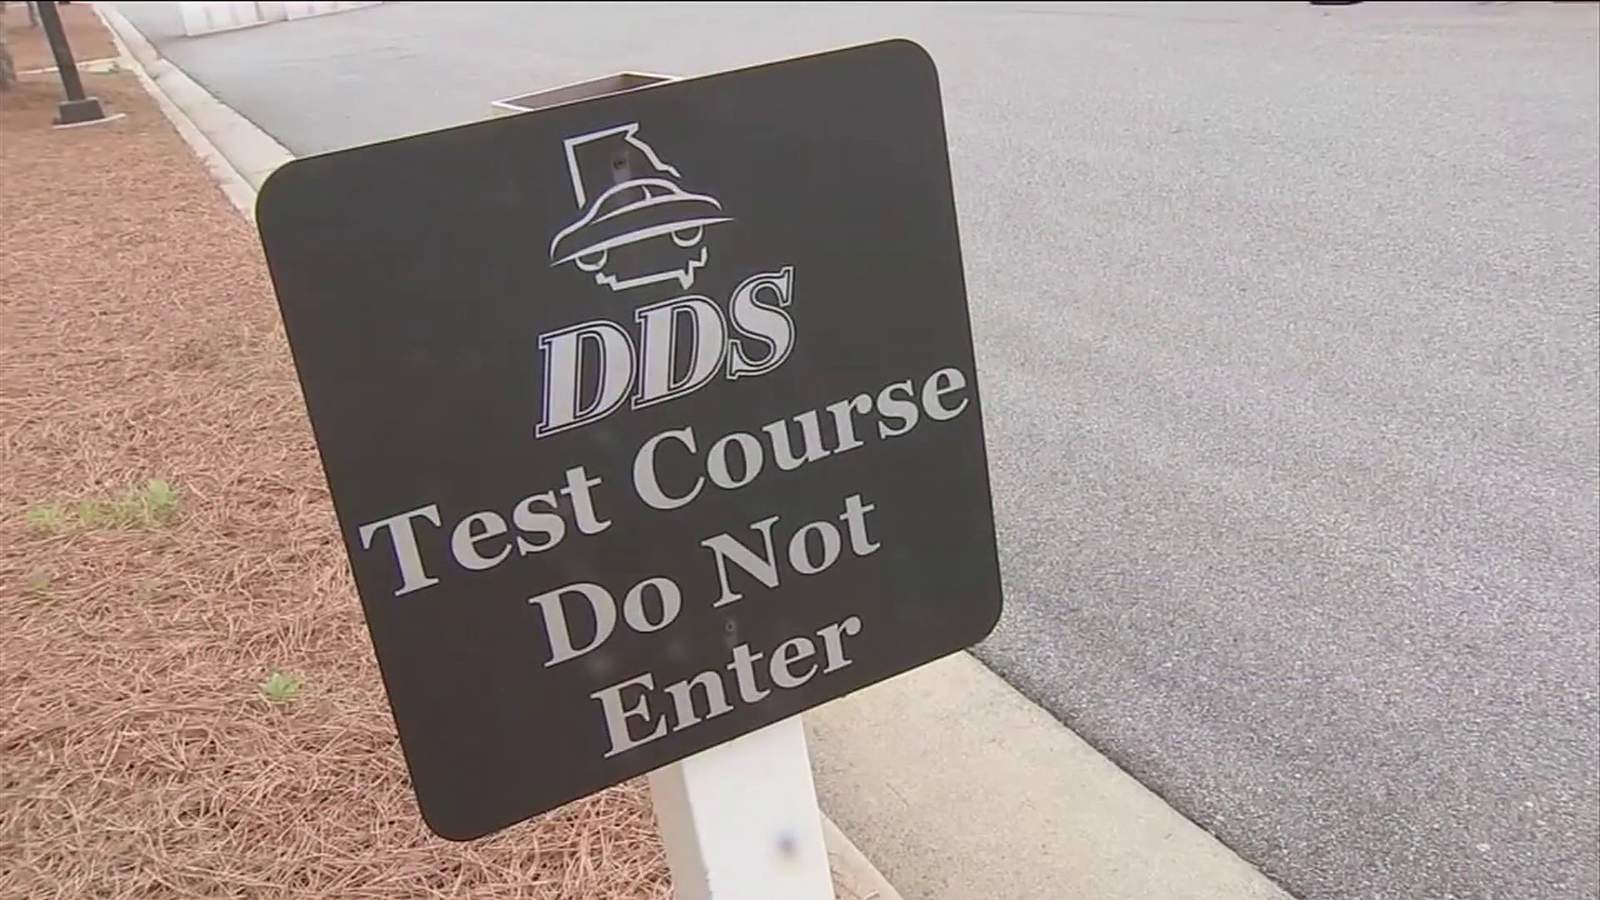 Georgia governor eliminates driving test requirement for teens due to coronavirus pandemic